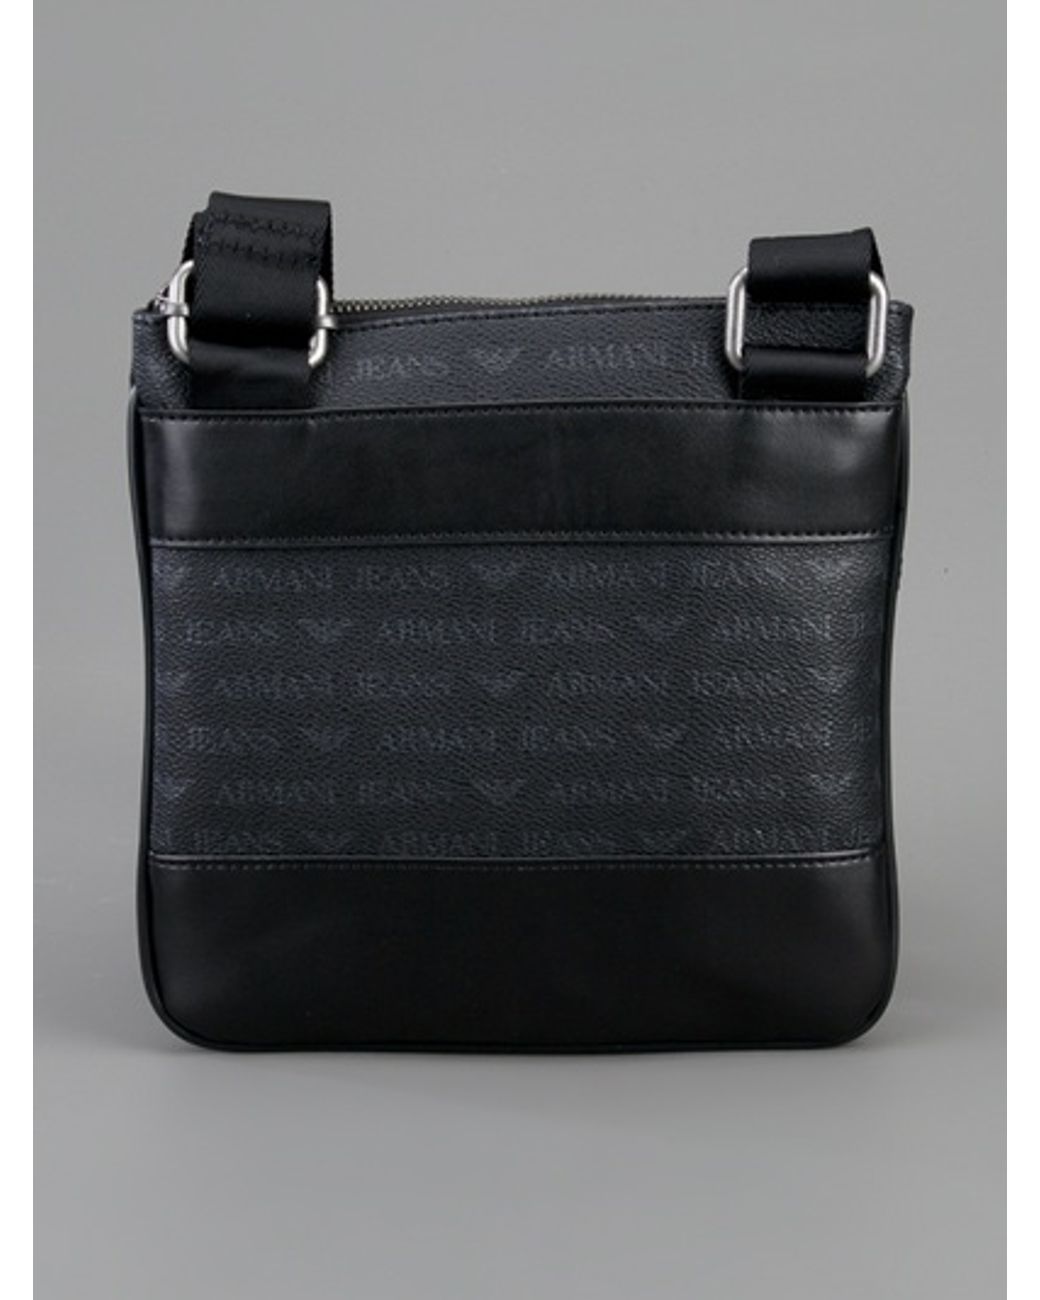 Armani Jeans Pouch Bag in Black for Men | Lyst UK